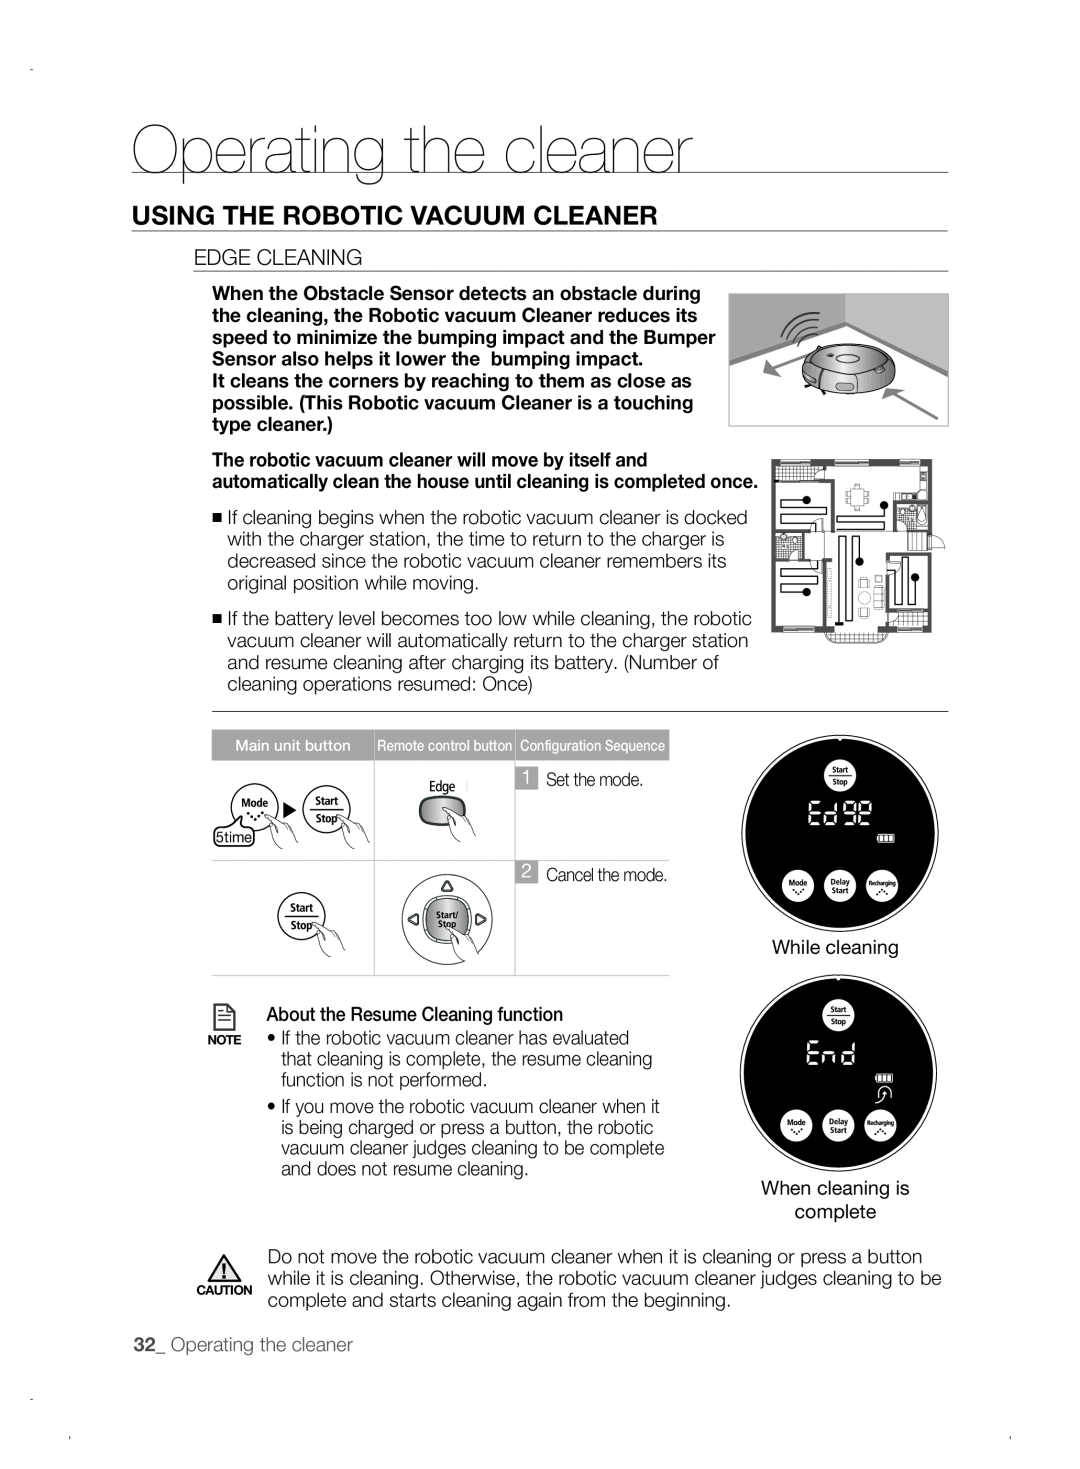 Samsung VCR8845T3A/XEO, VCR8845T3A/XET manual Operating the cleaner, Using the robotic vacuum cleaner, Edge Cleaning 